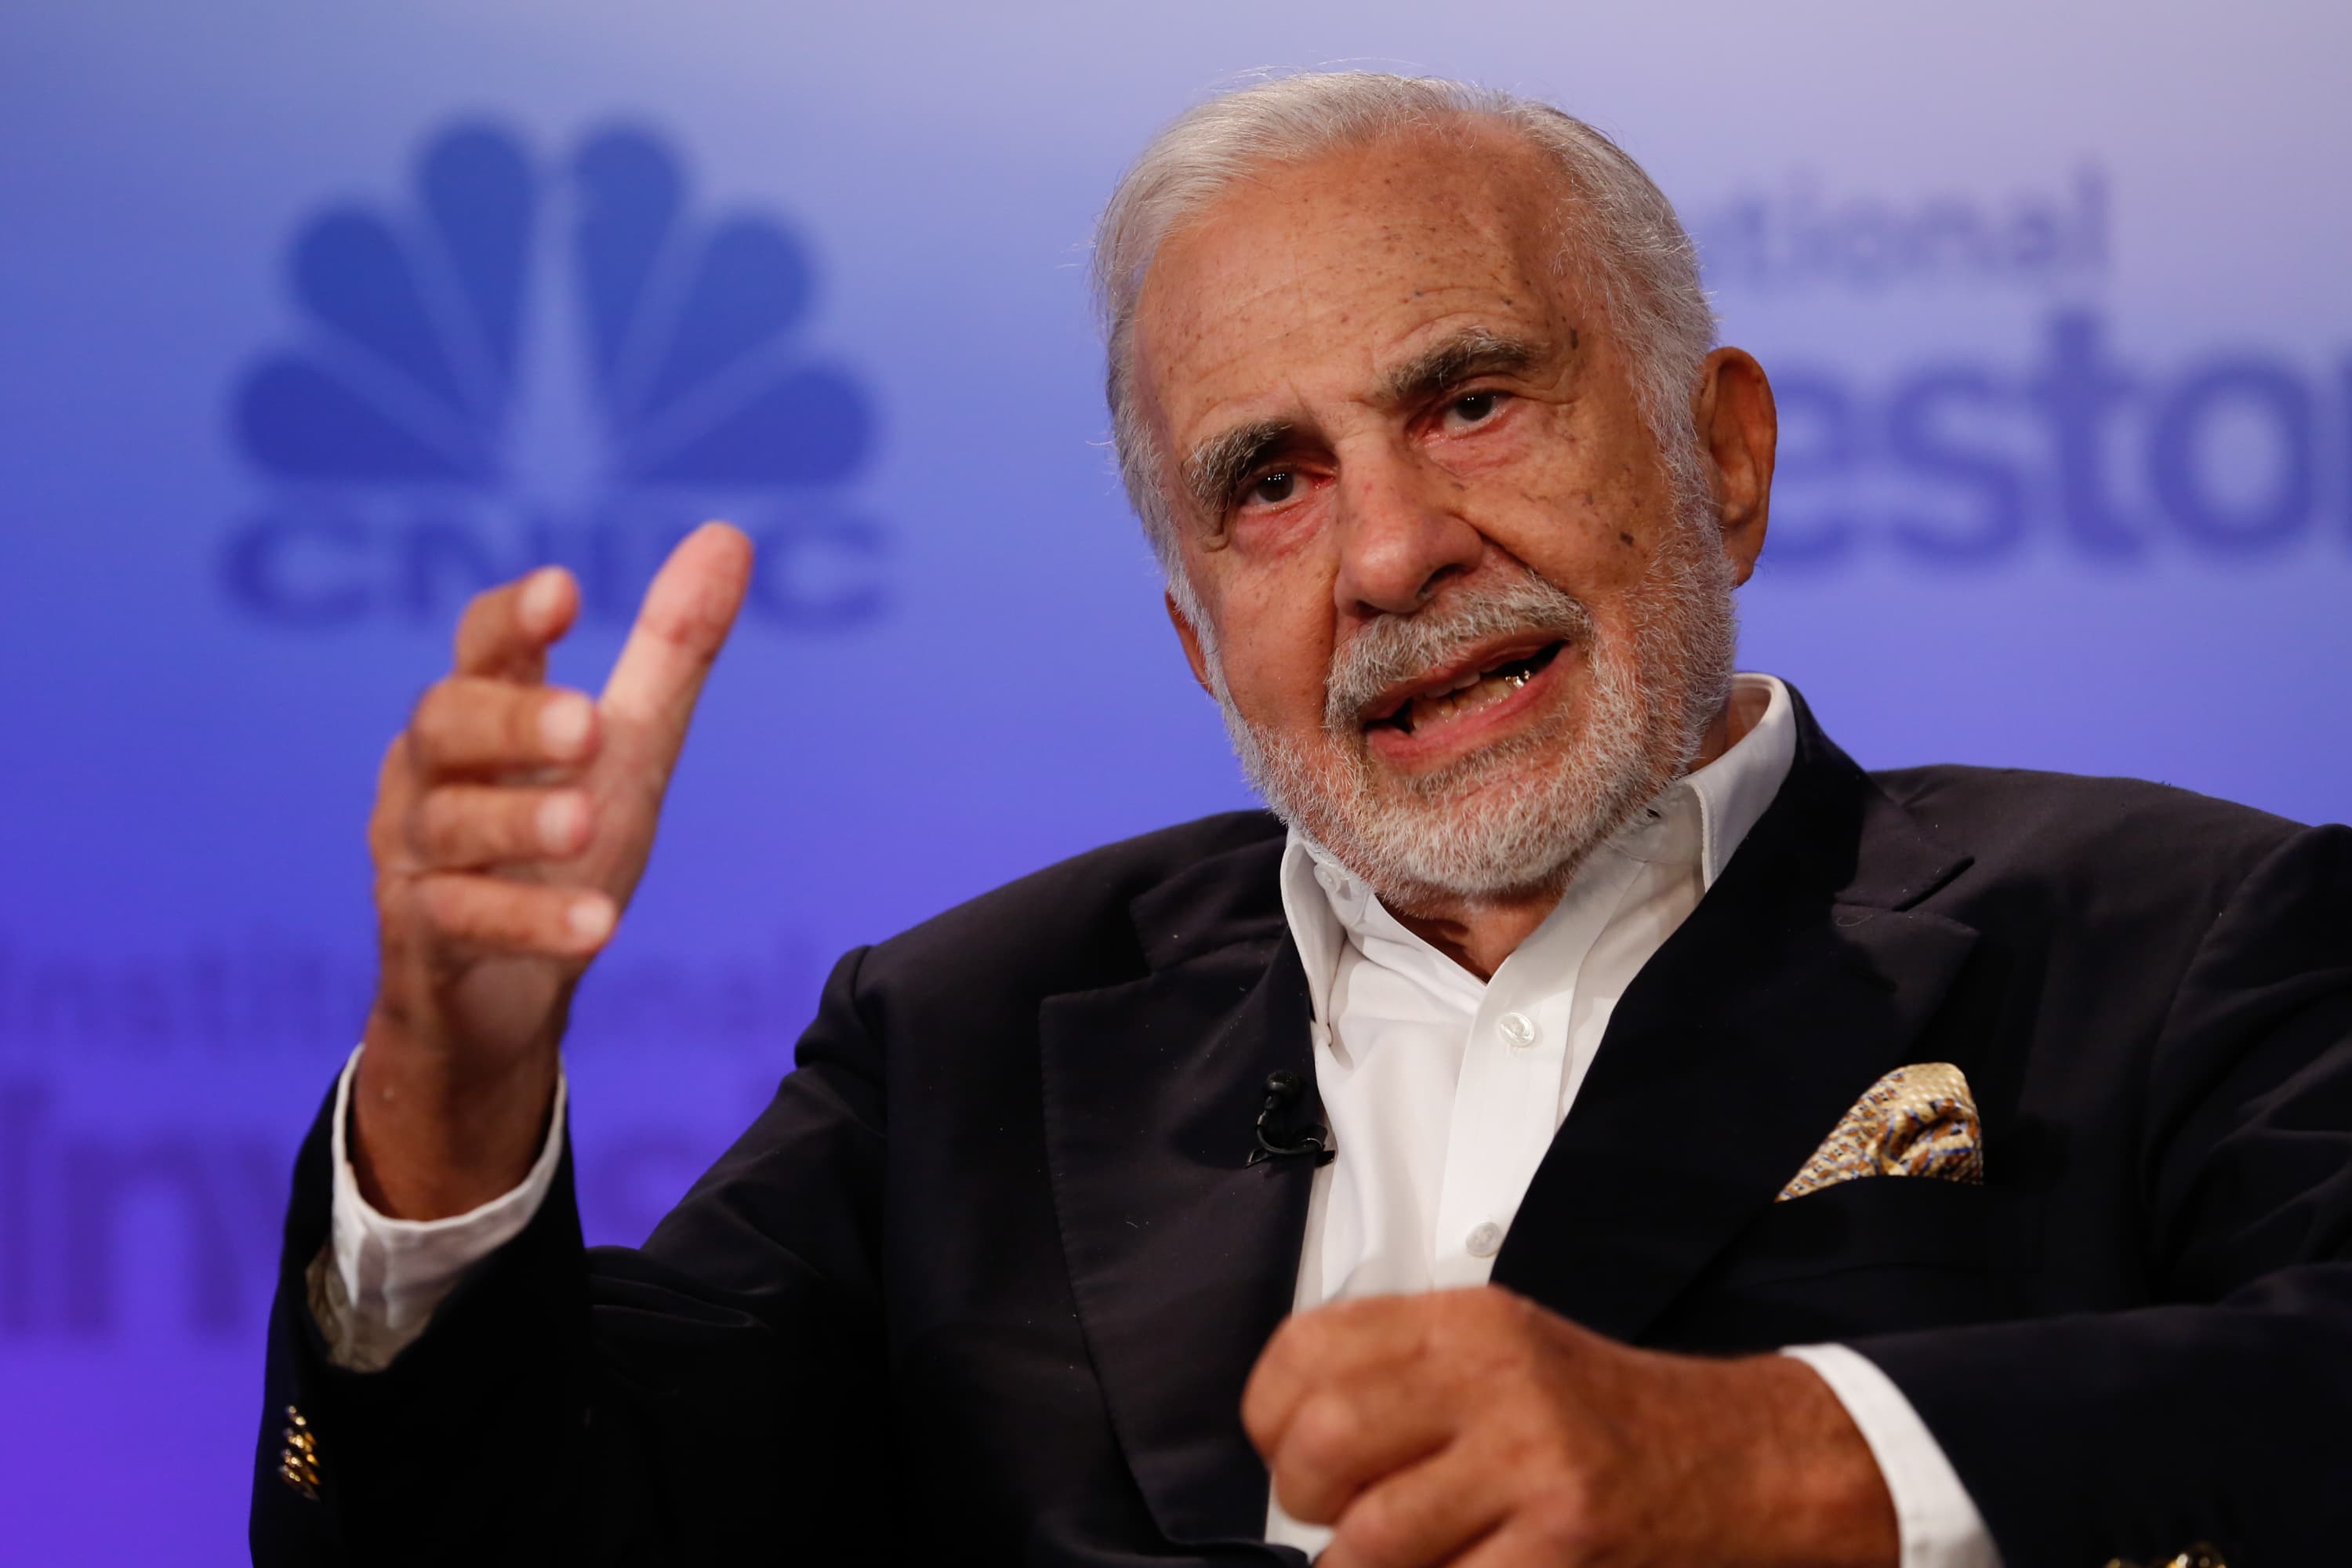 Carl Icahn warns that the market march could end in a painful correction and hedge accordingly